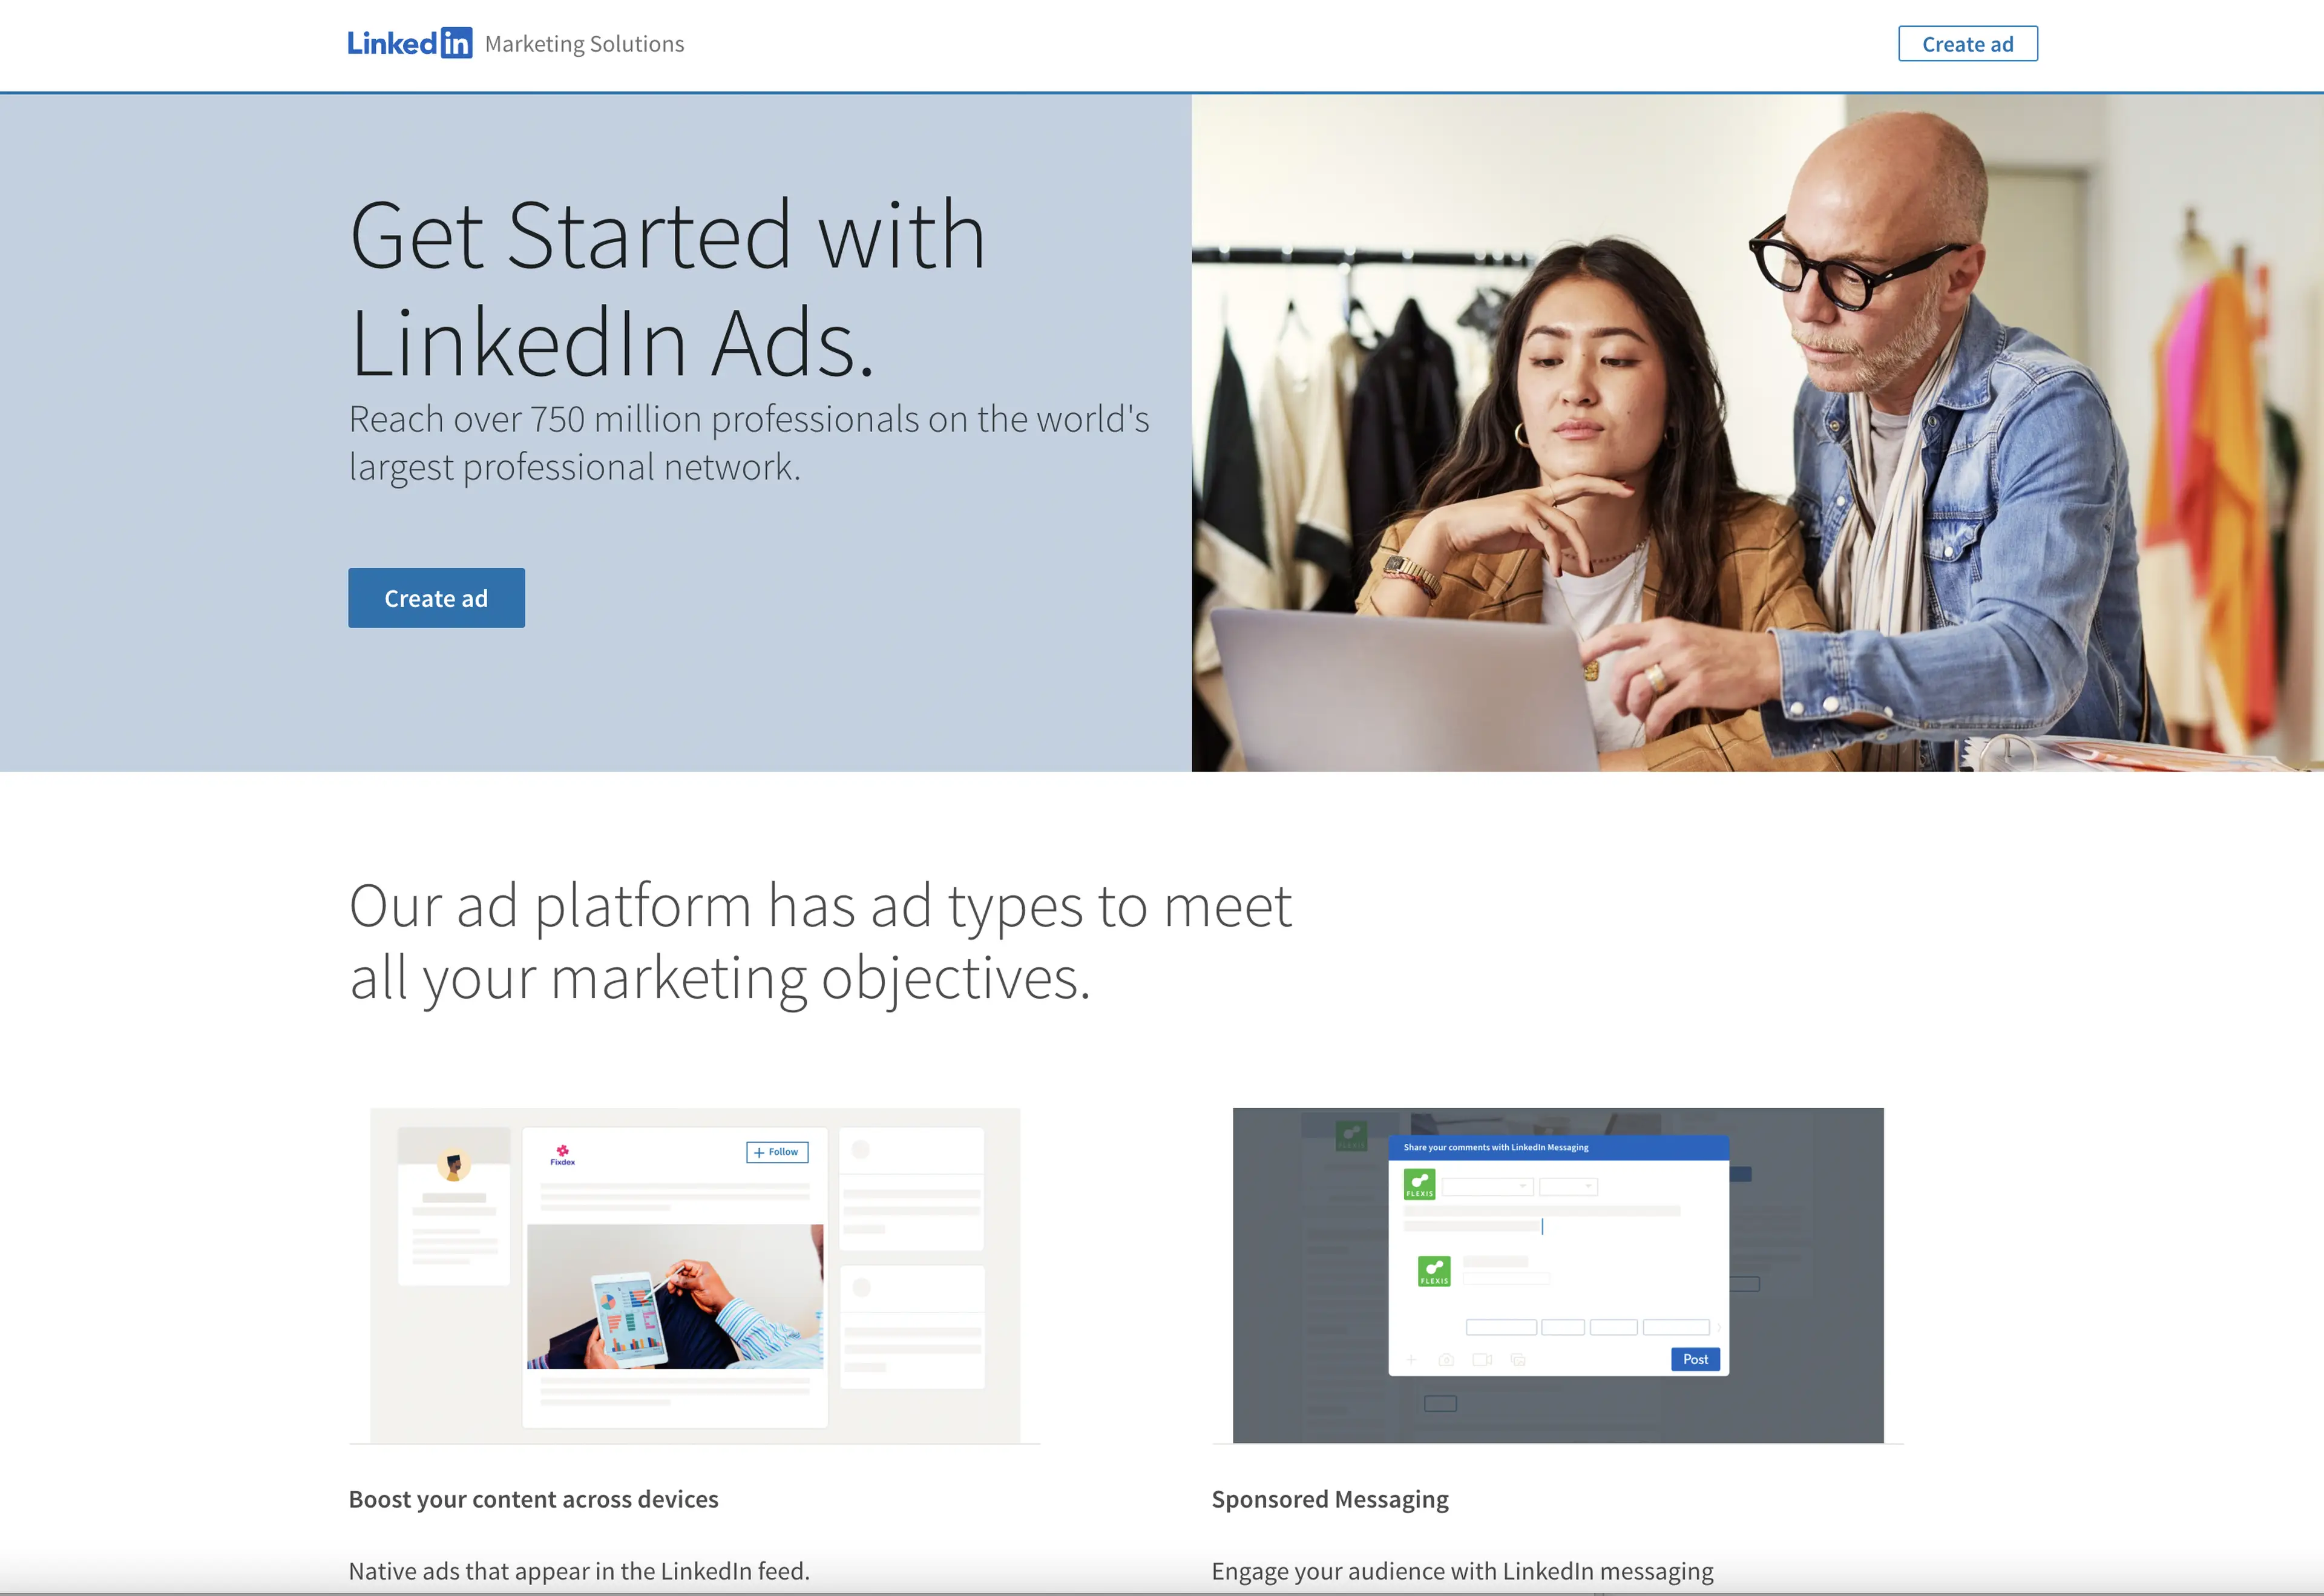 A screenshot of LinkedIn Marketing Solutions page with words Get Started with LinkedIn Ads